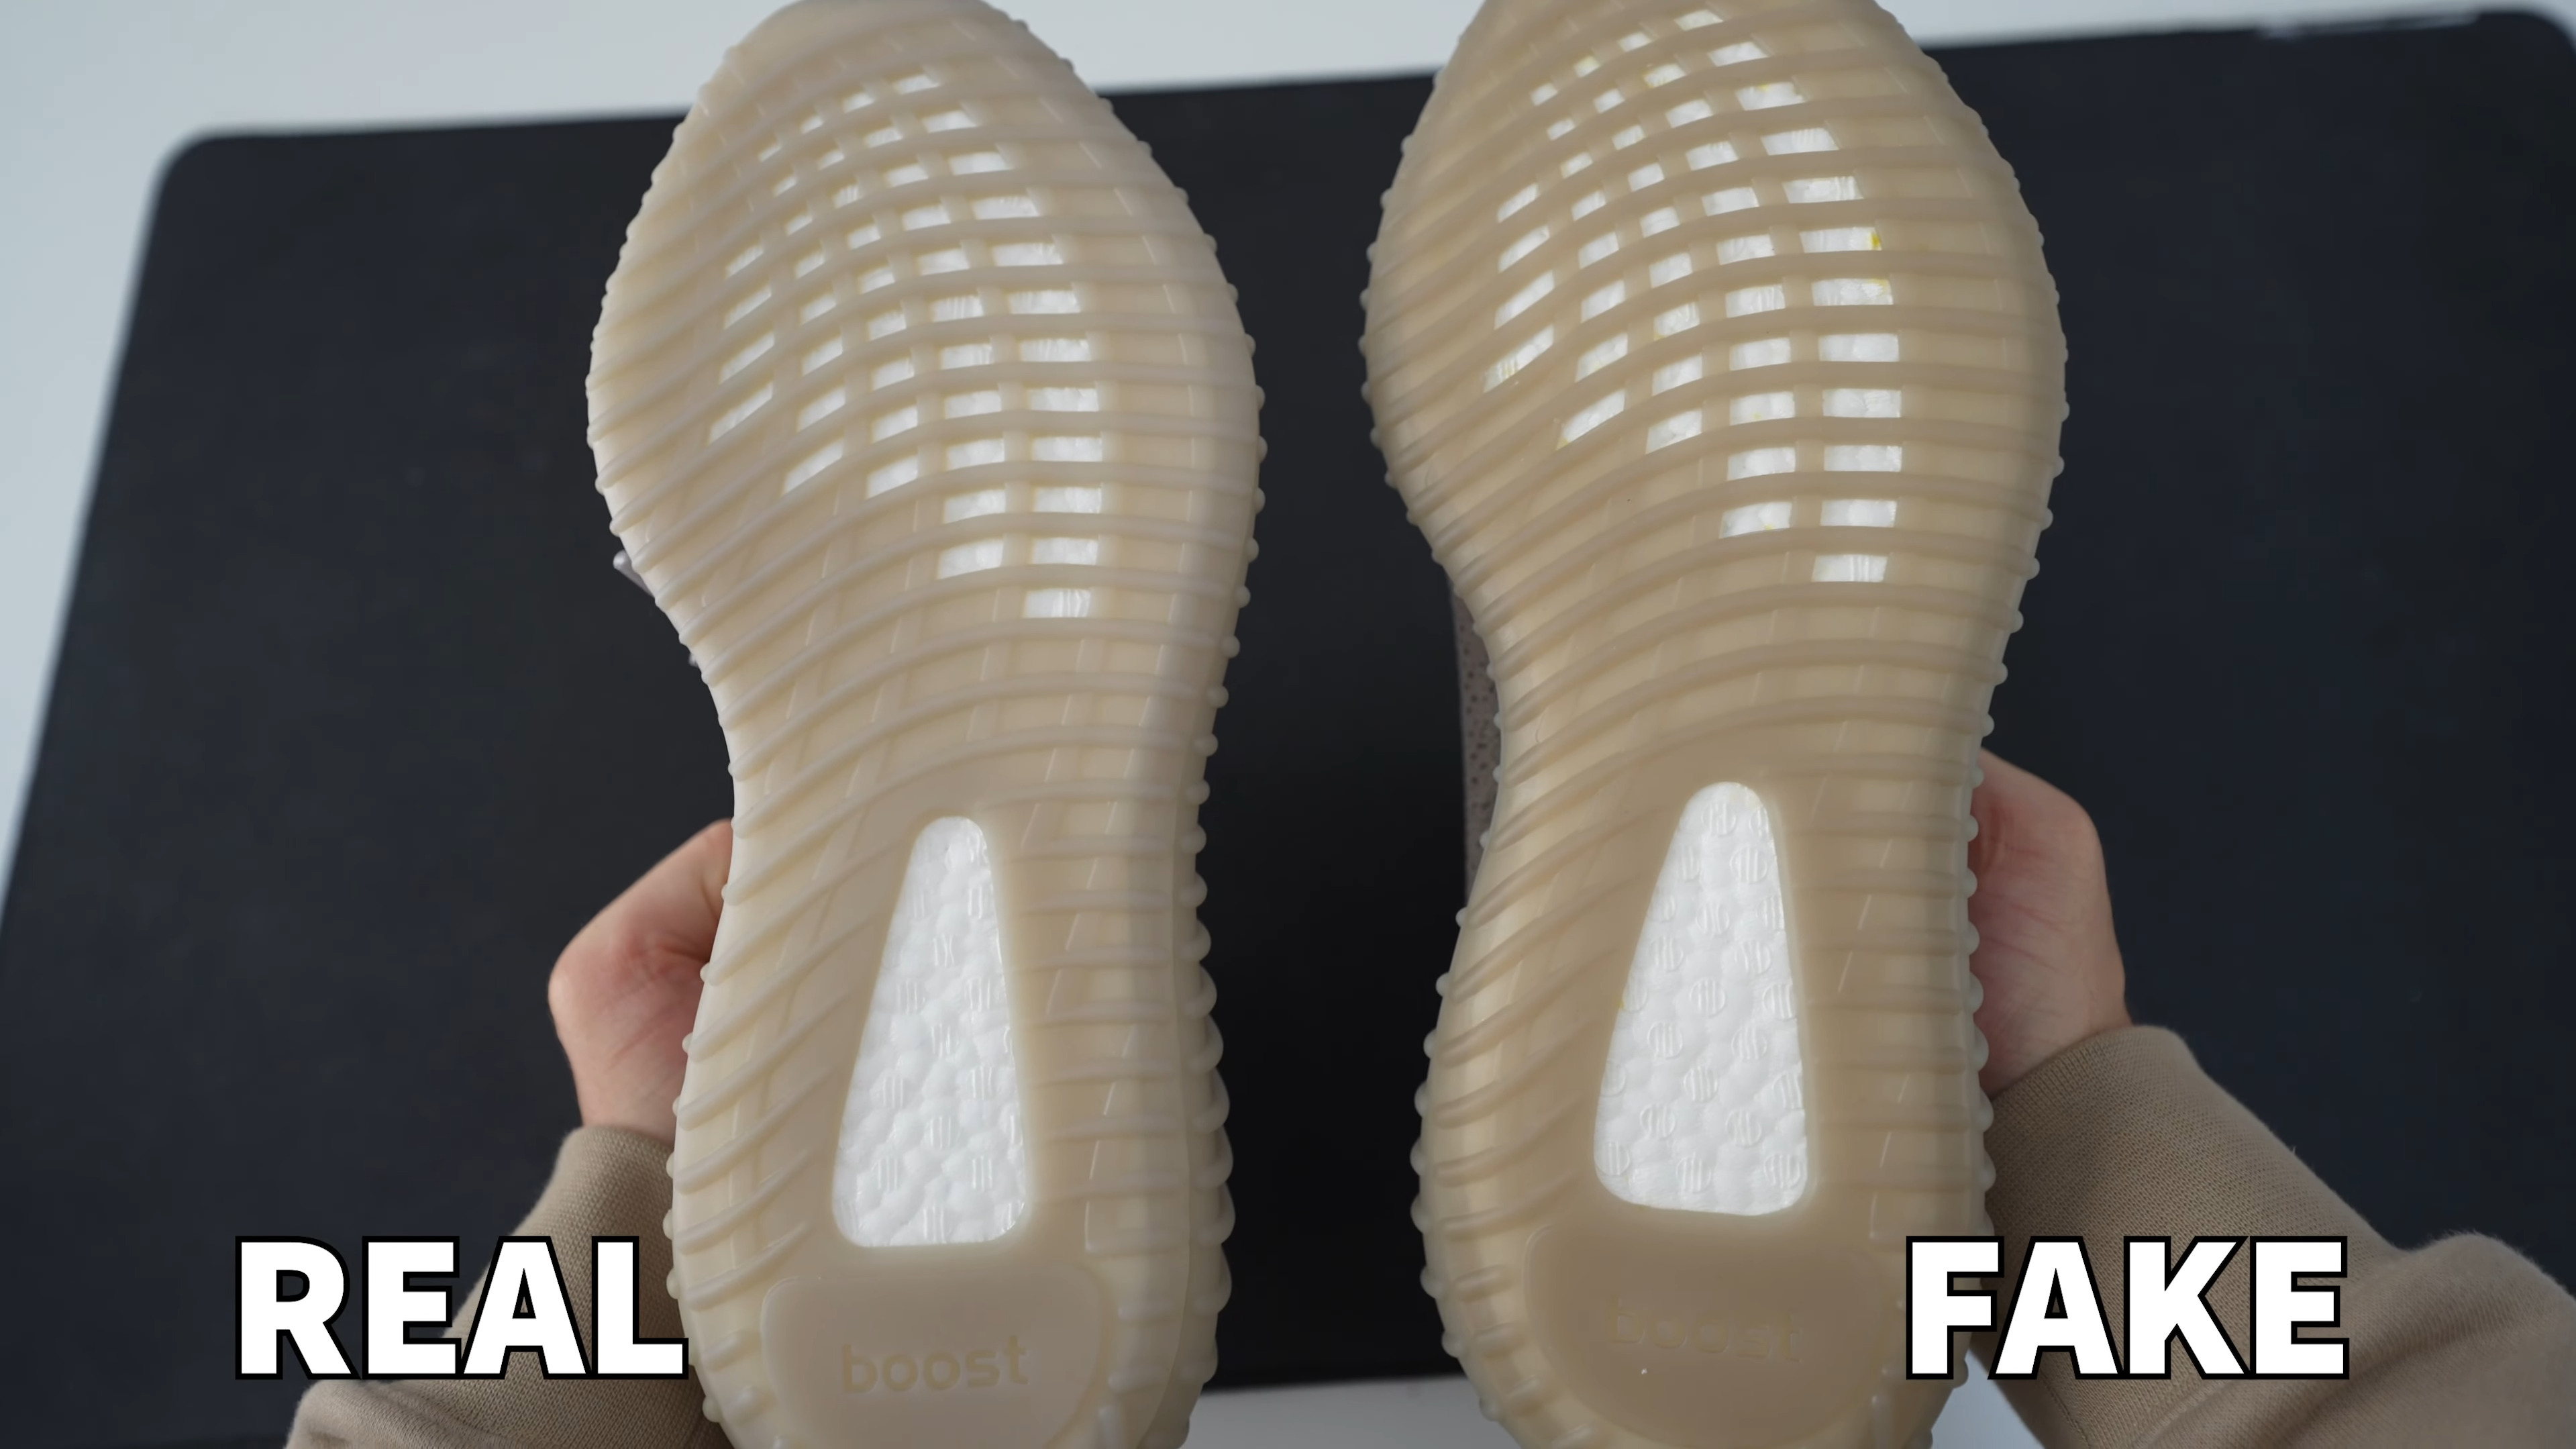 Comparing The color of outsole of the real yeezy 350 on the left and fake on the right.